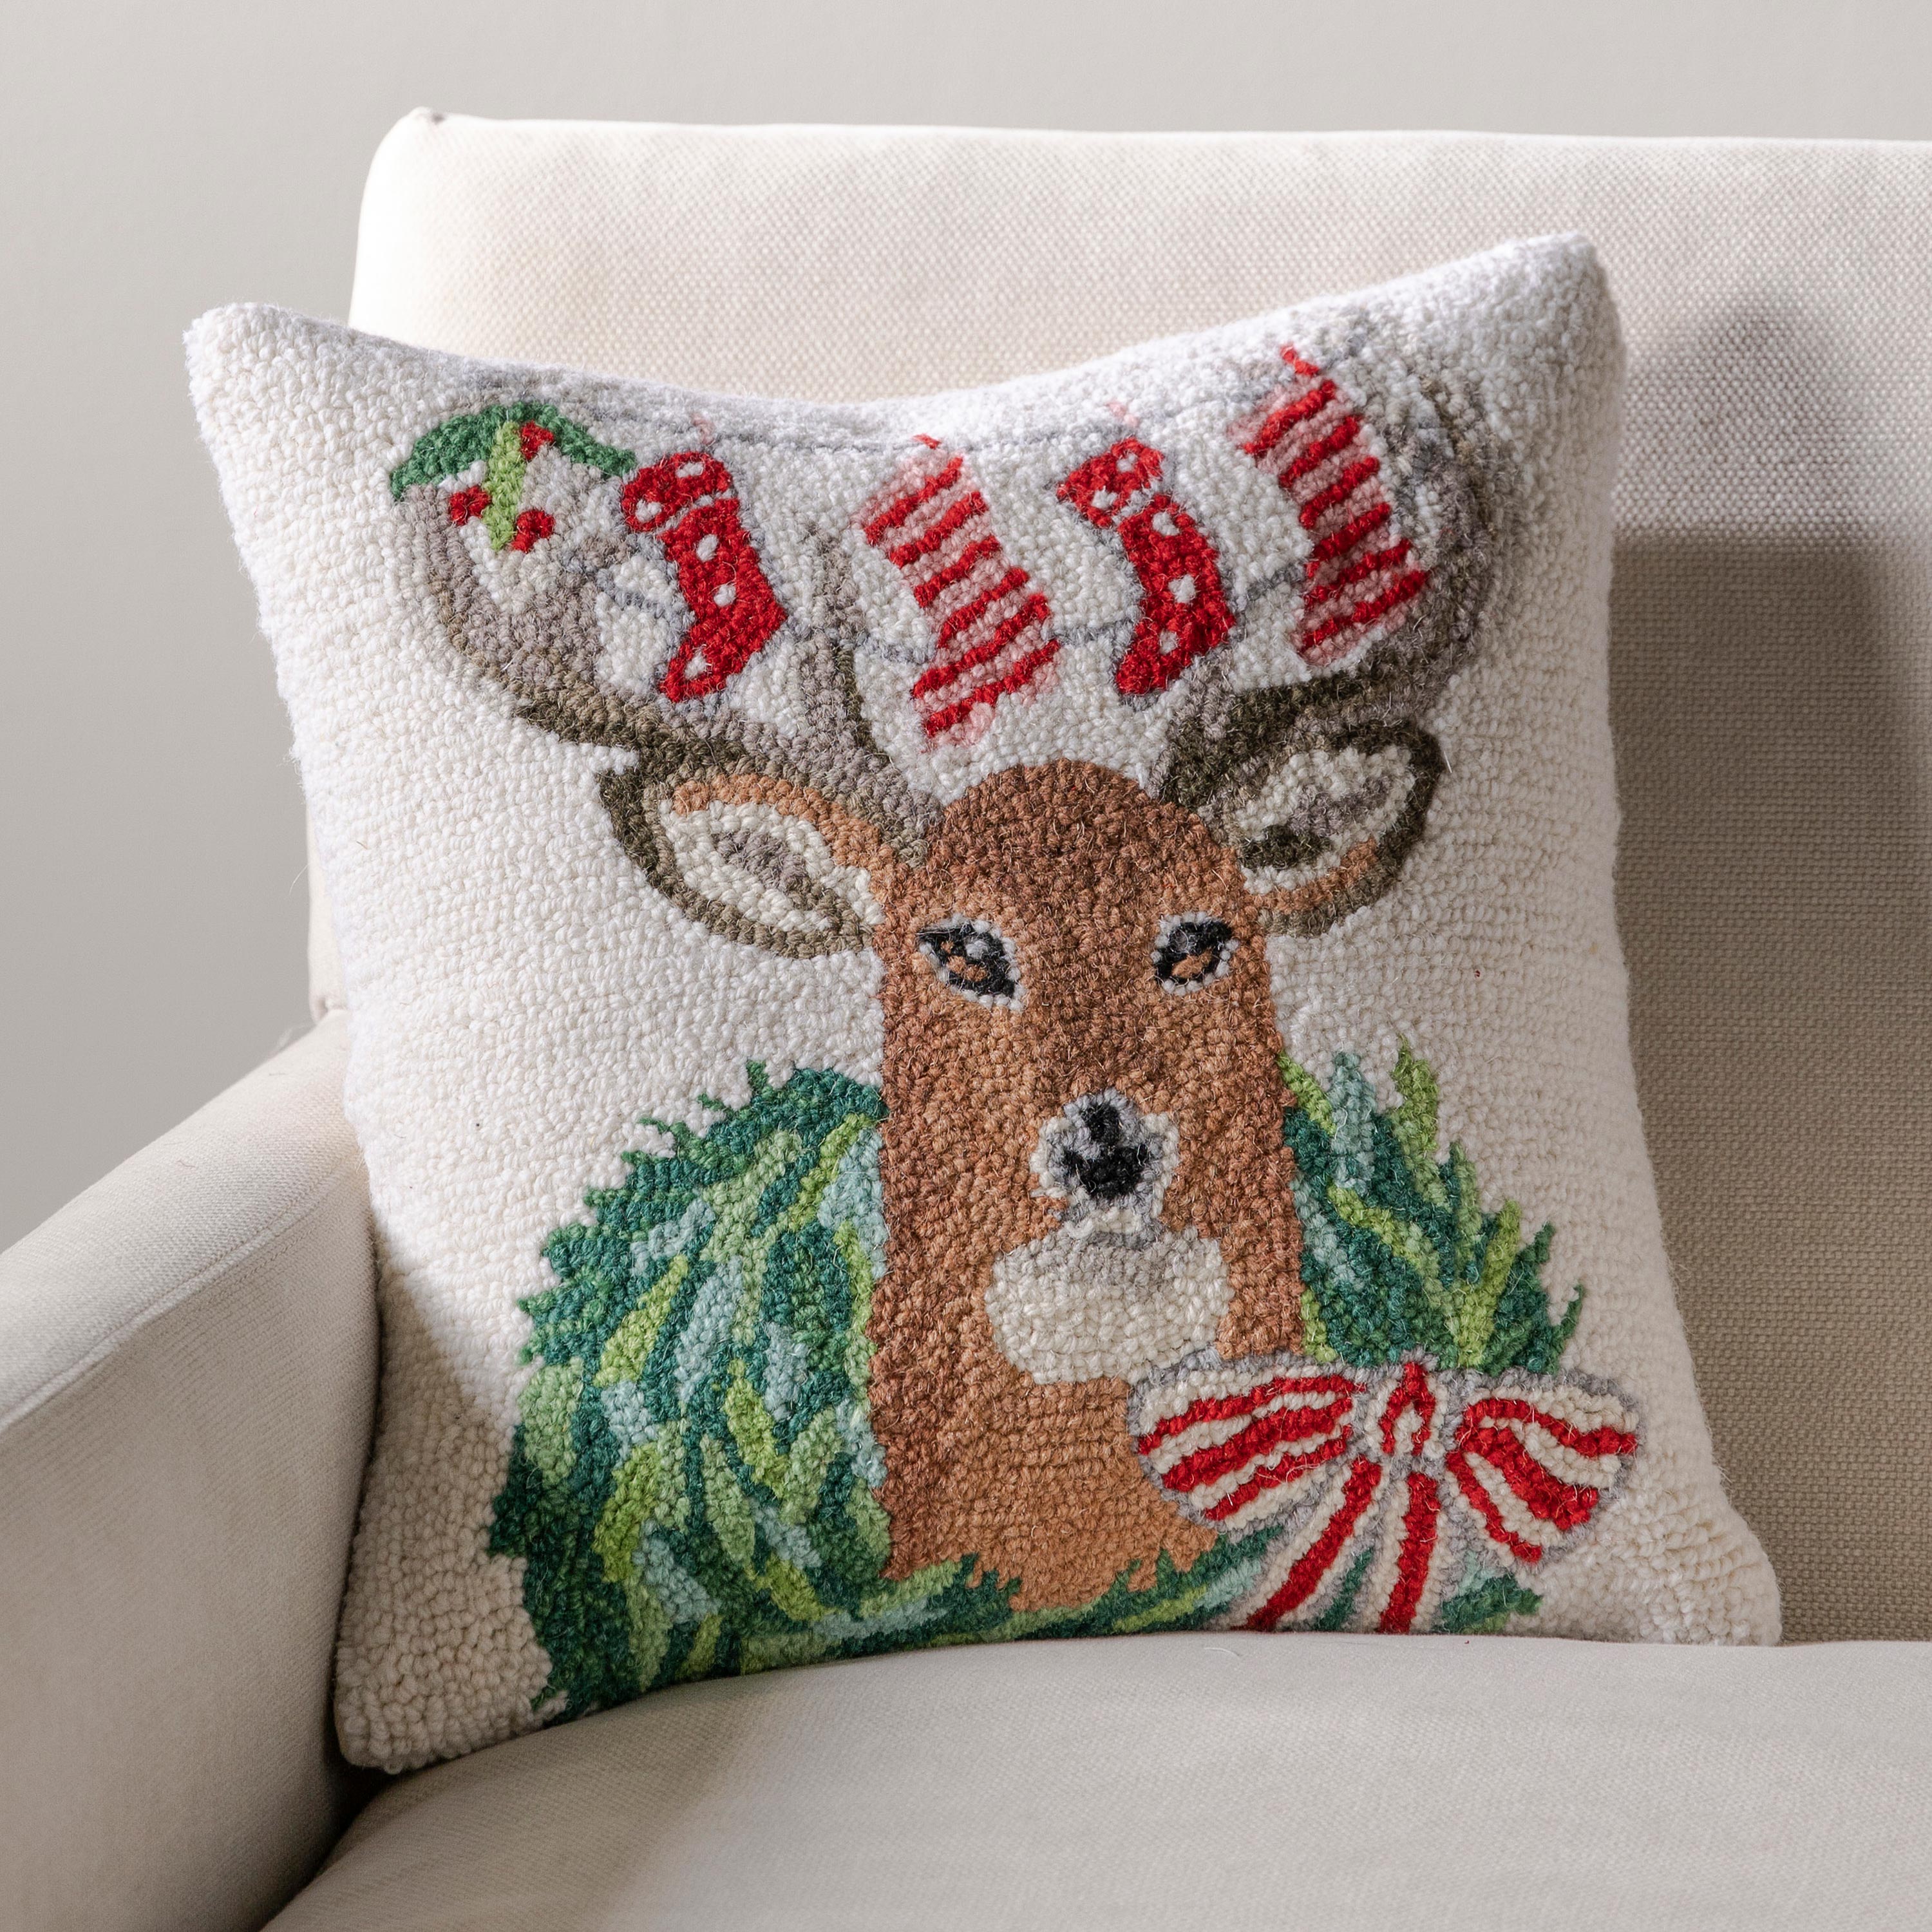 Reindeer with Wreath Hand-Hooked Pillow